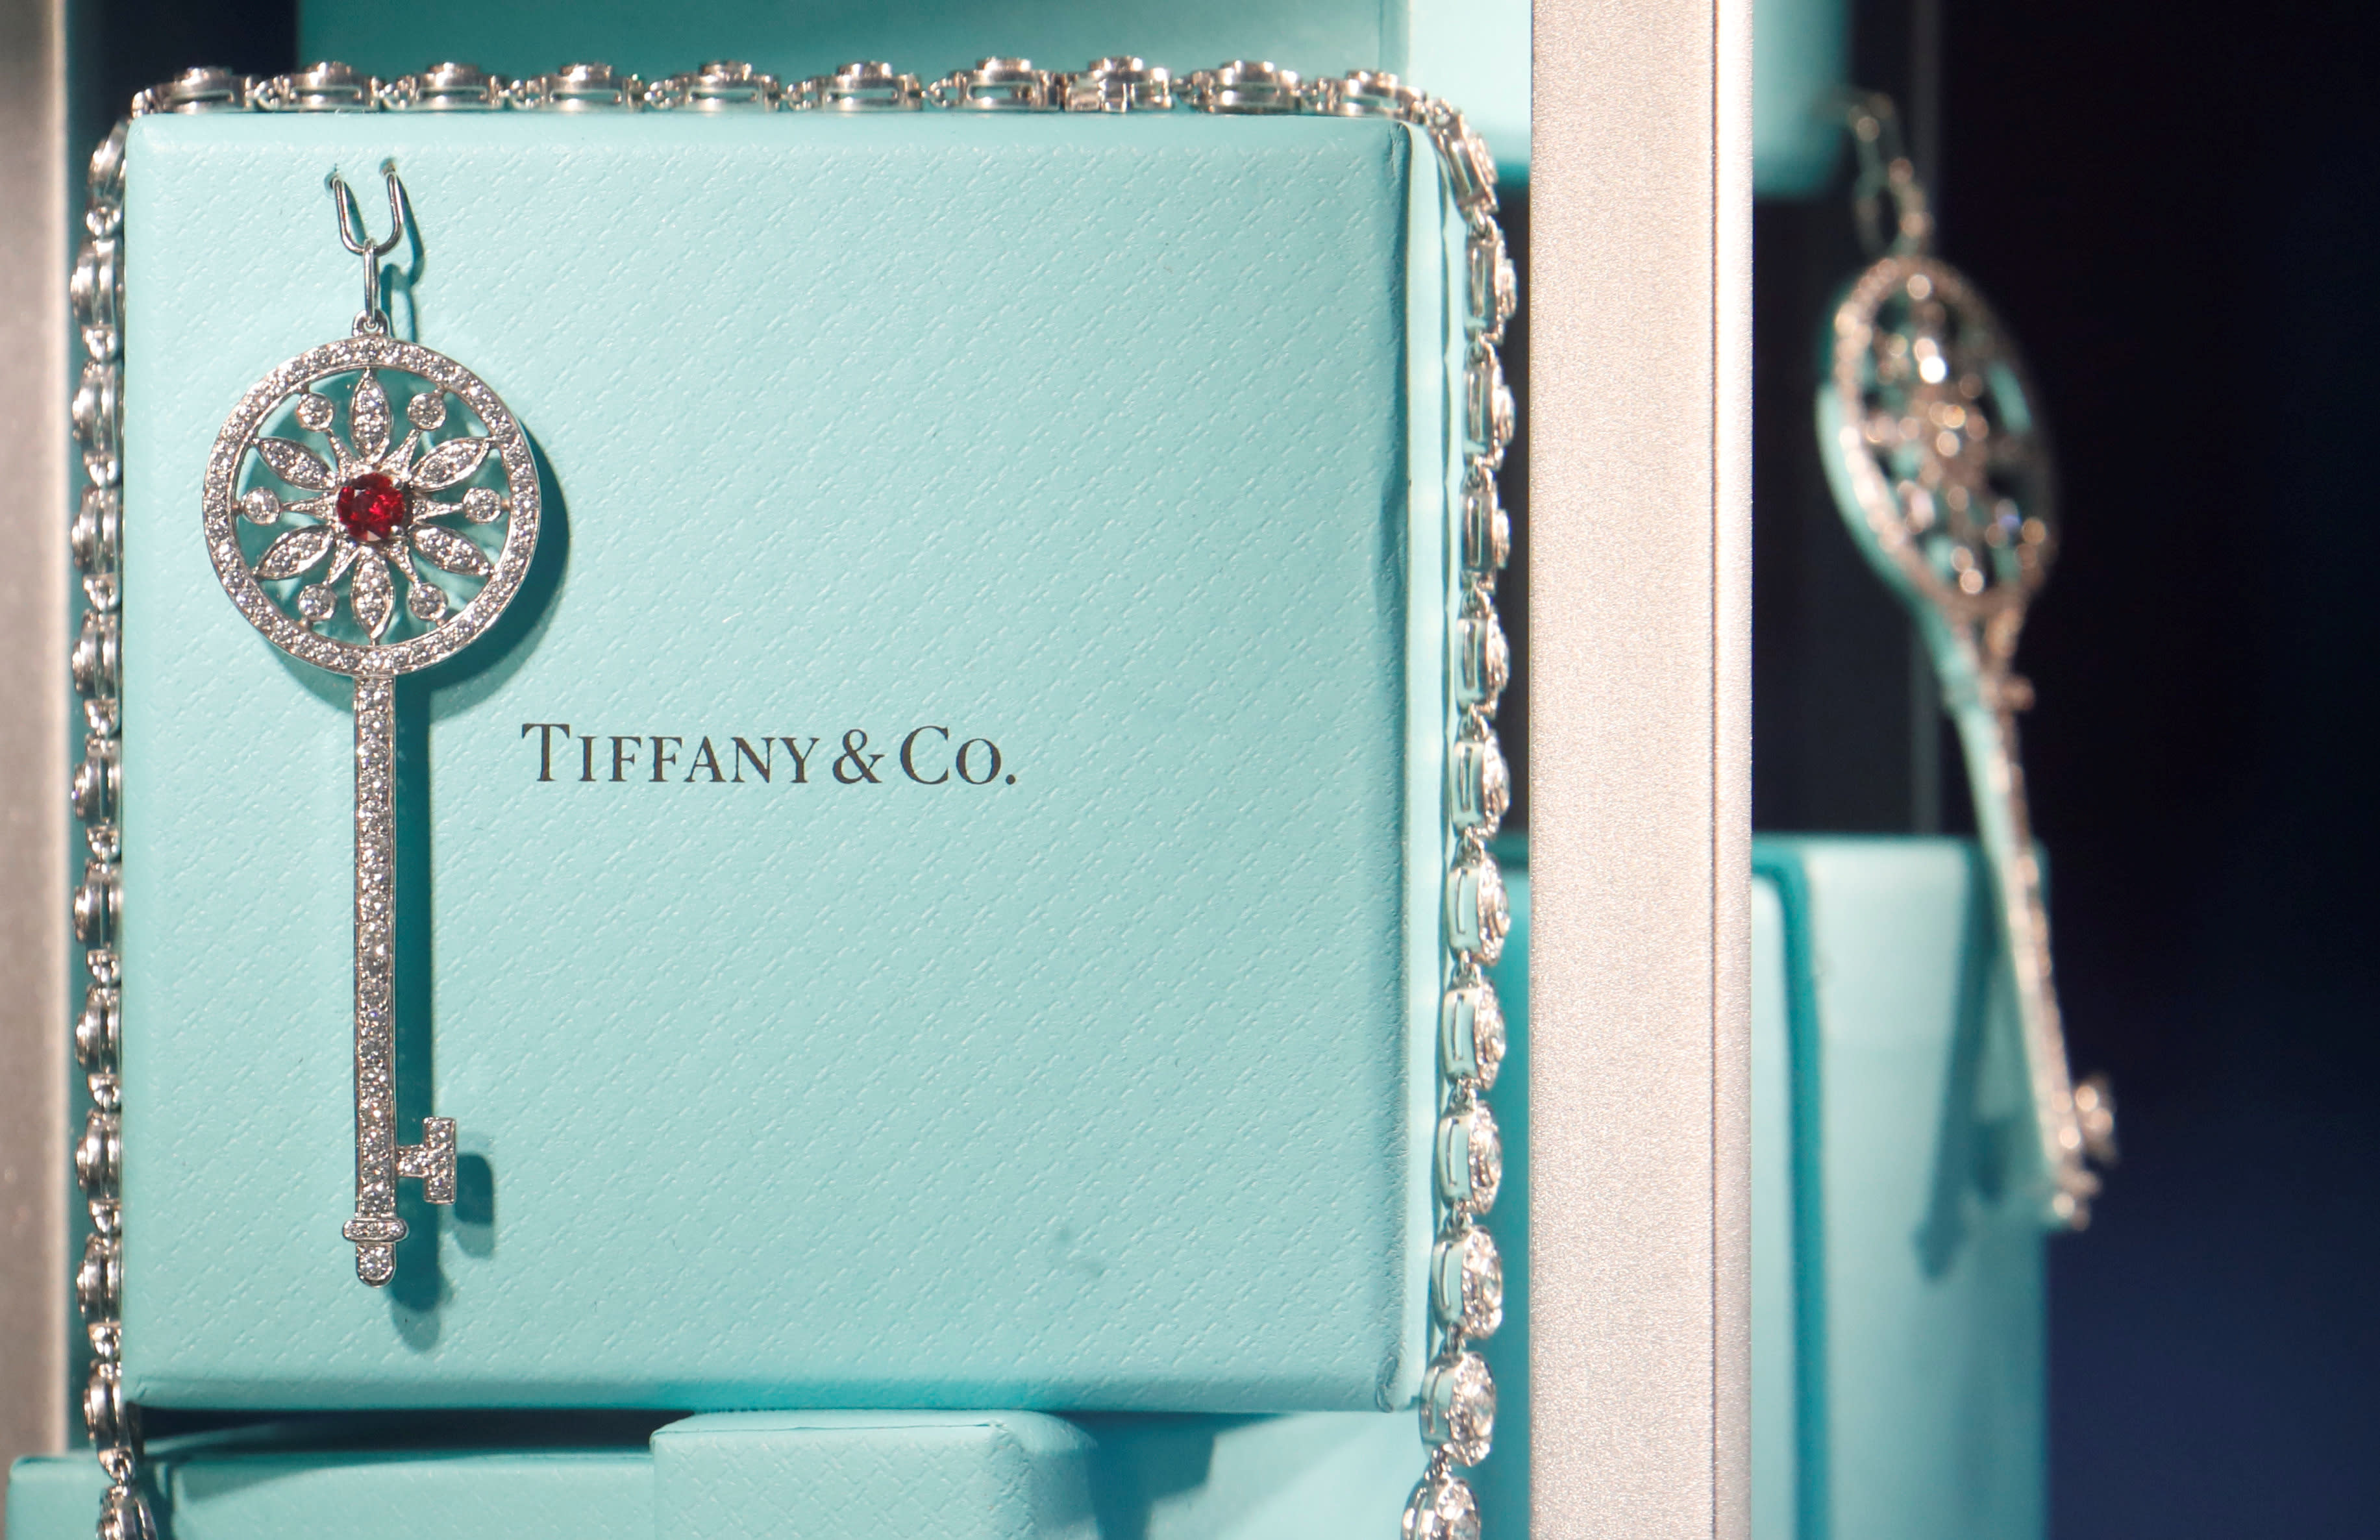 Louis Vuitton parent buying Tiffany for $16.2B